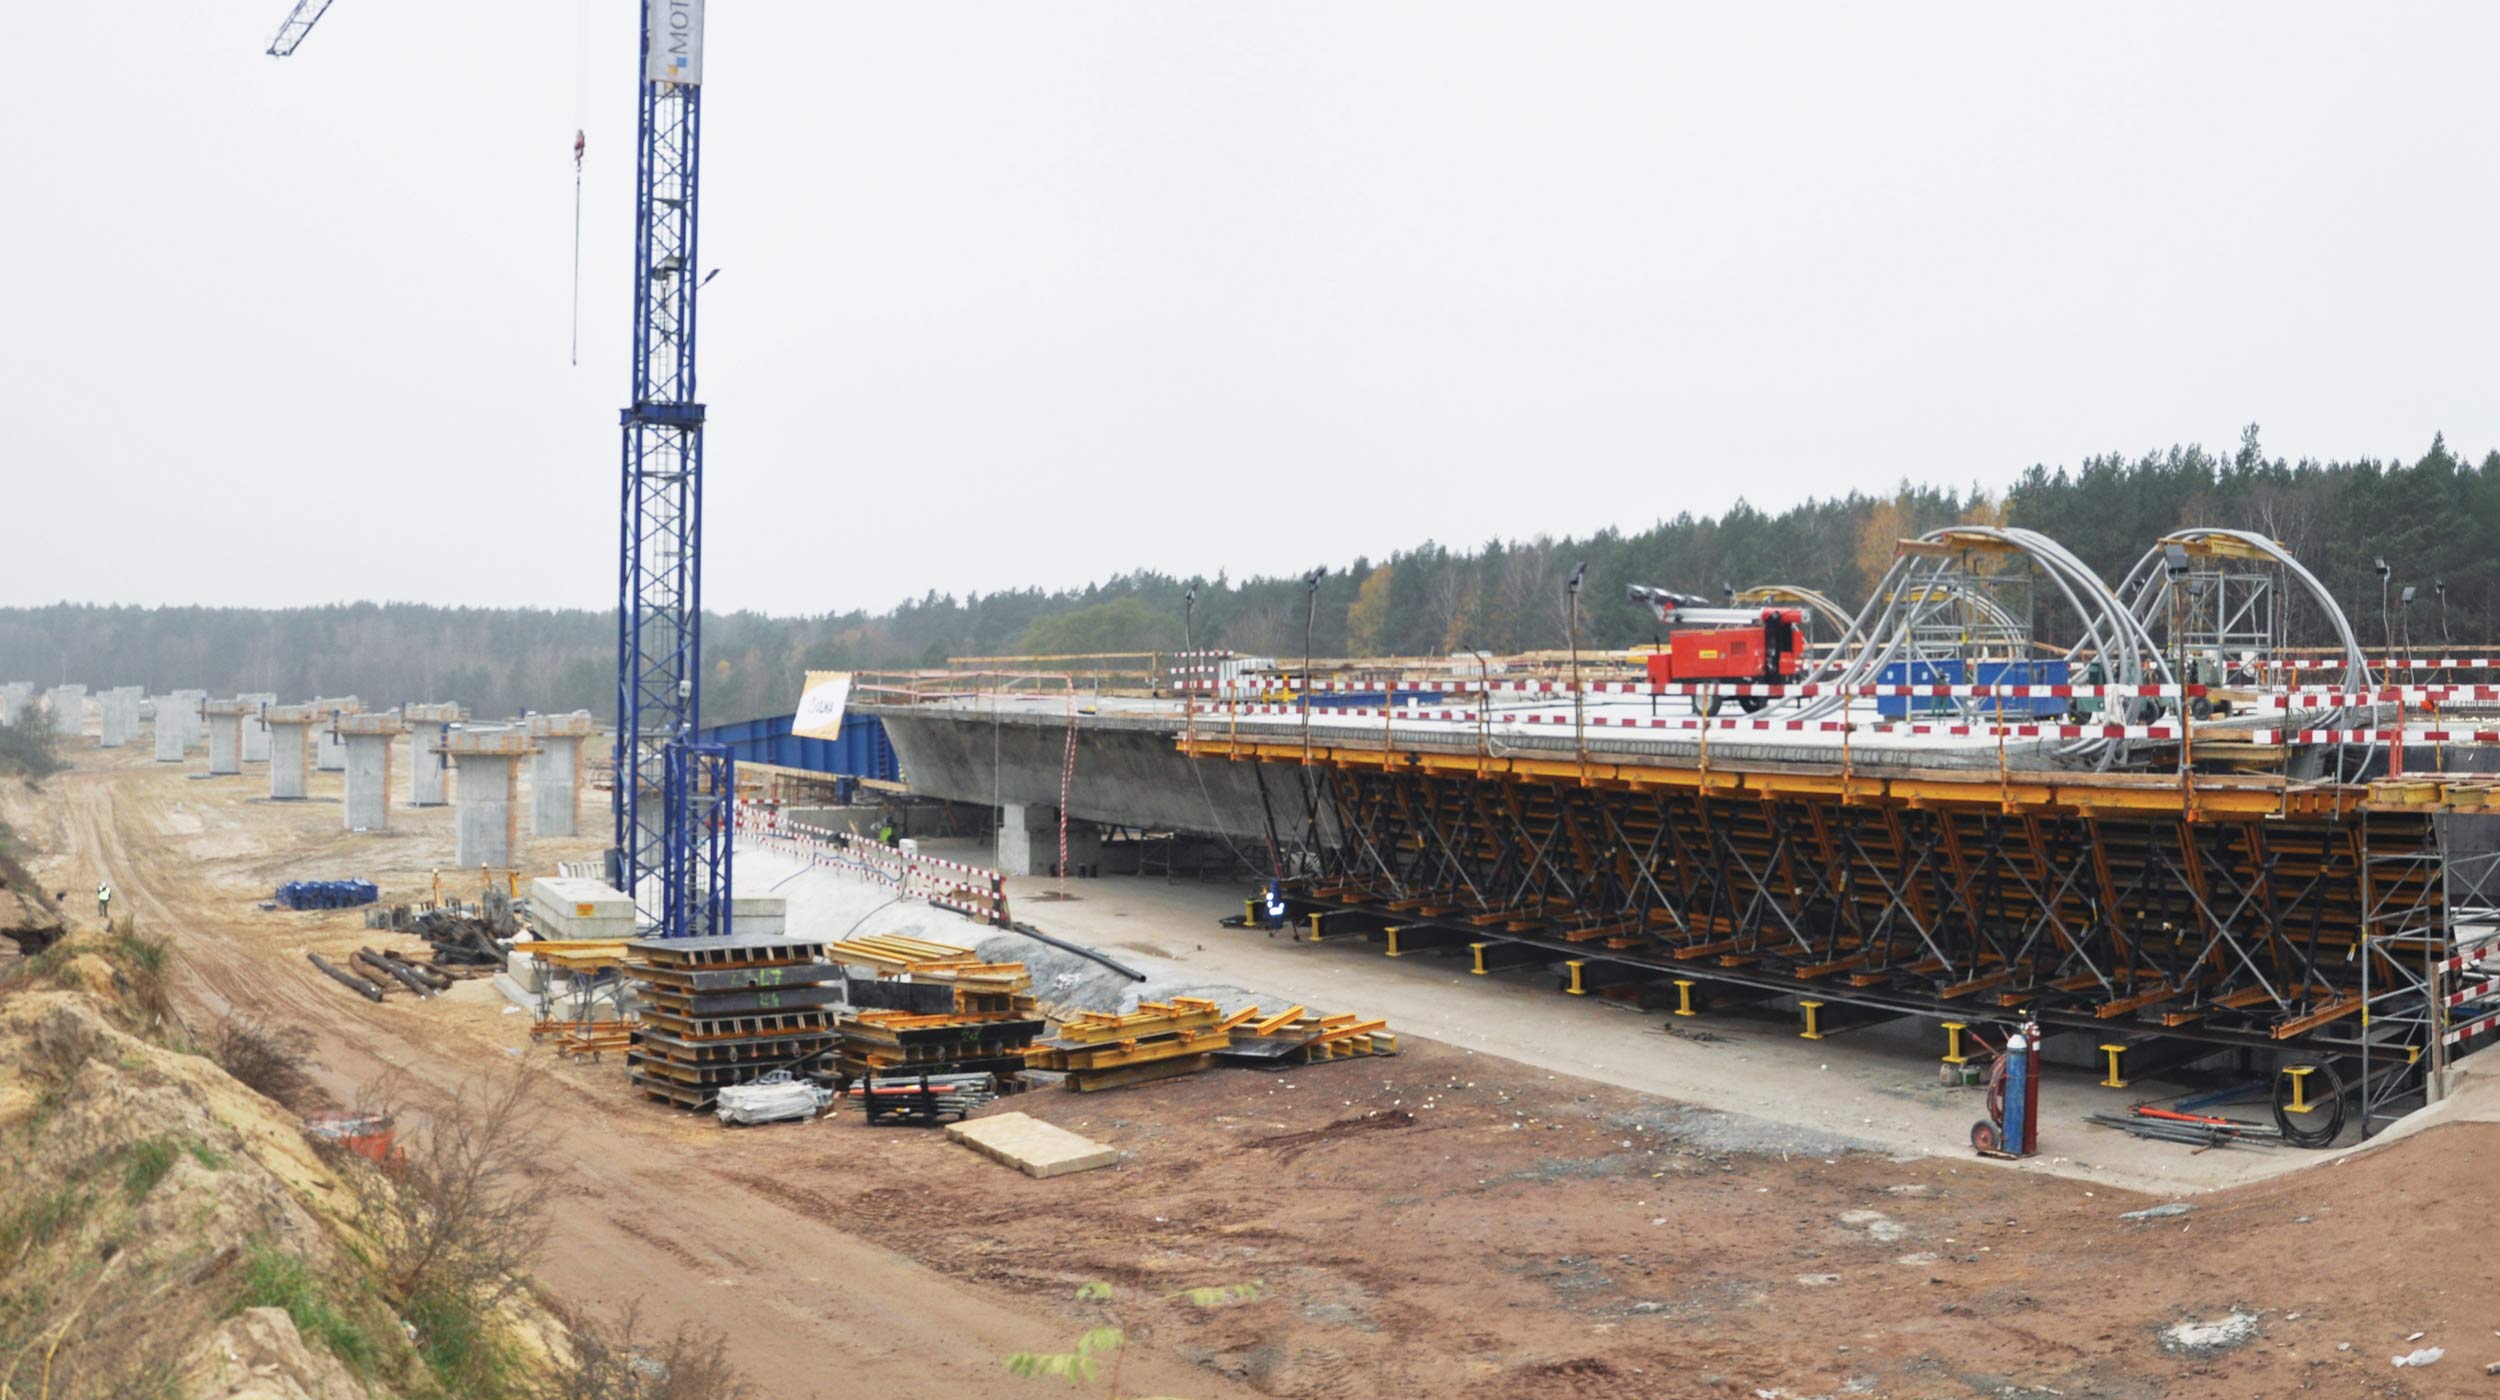 This bridge is part of the Motorway S3, which will link the Baltic Sea with the Czech Republic.